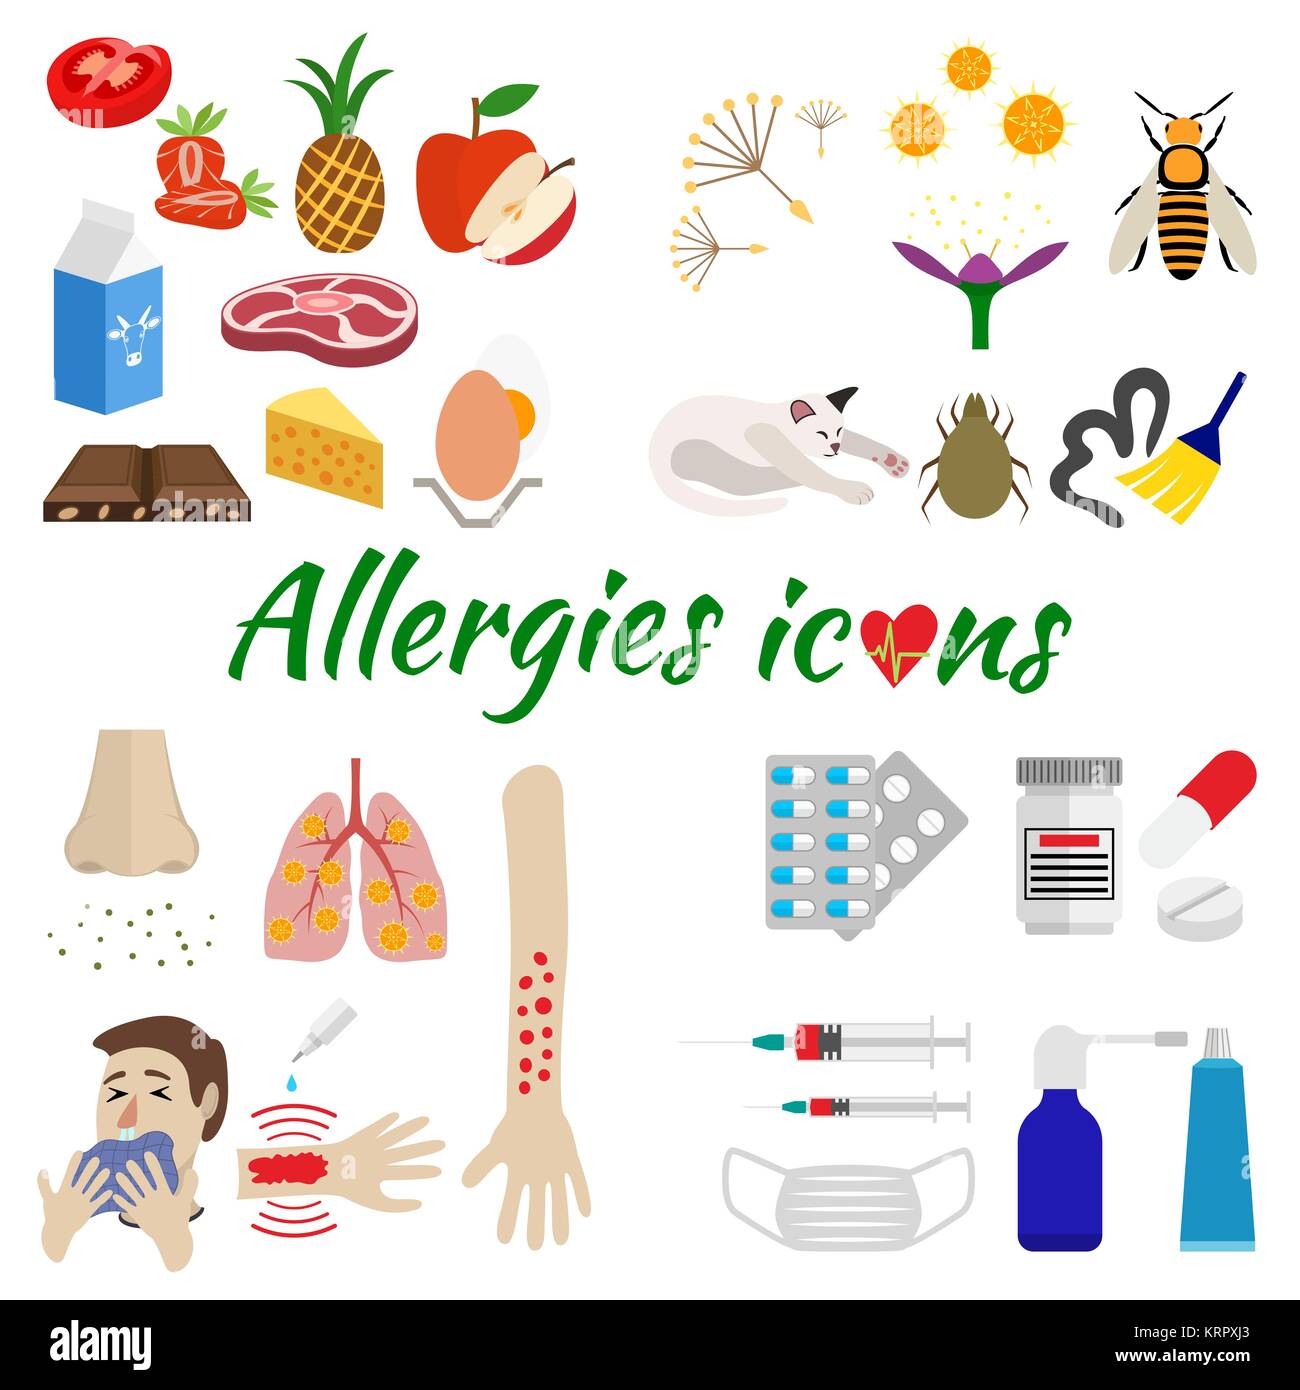 the icons are allergic split by category on allergens, symptoms and treatment. isolated on white background Stock Vector